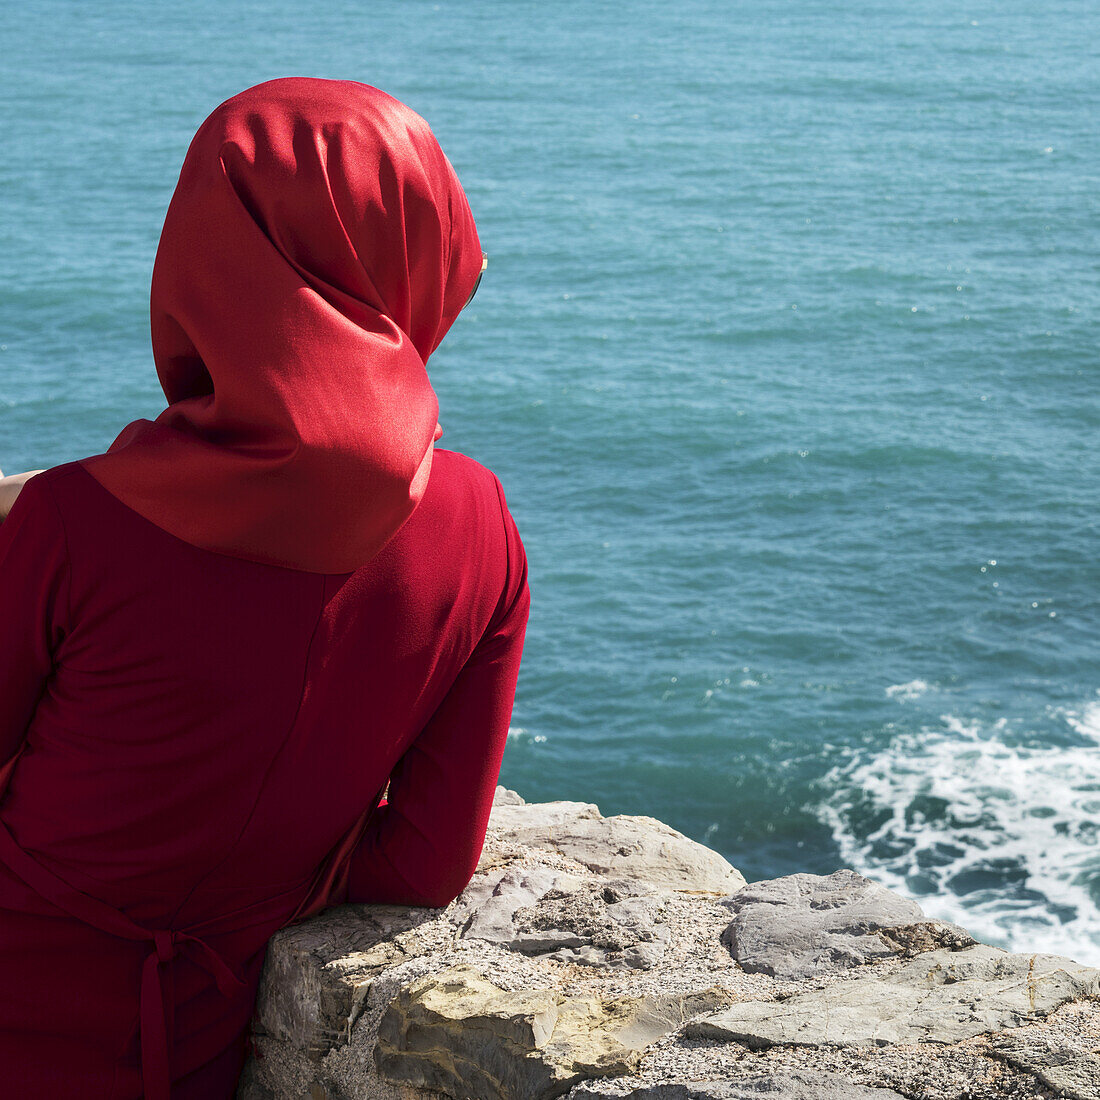 A woman wearing a red headscarf and red dress stands at a stone wall looking out at the blue water; Budva, Budva Municipality, Montenegro